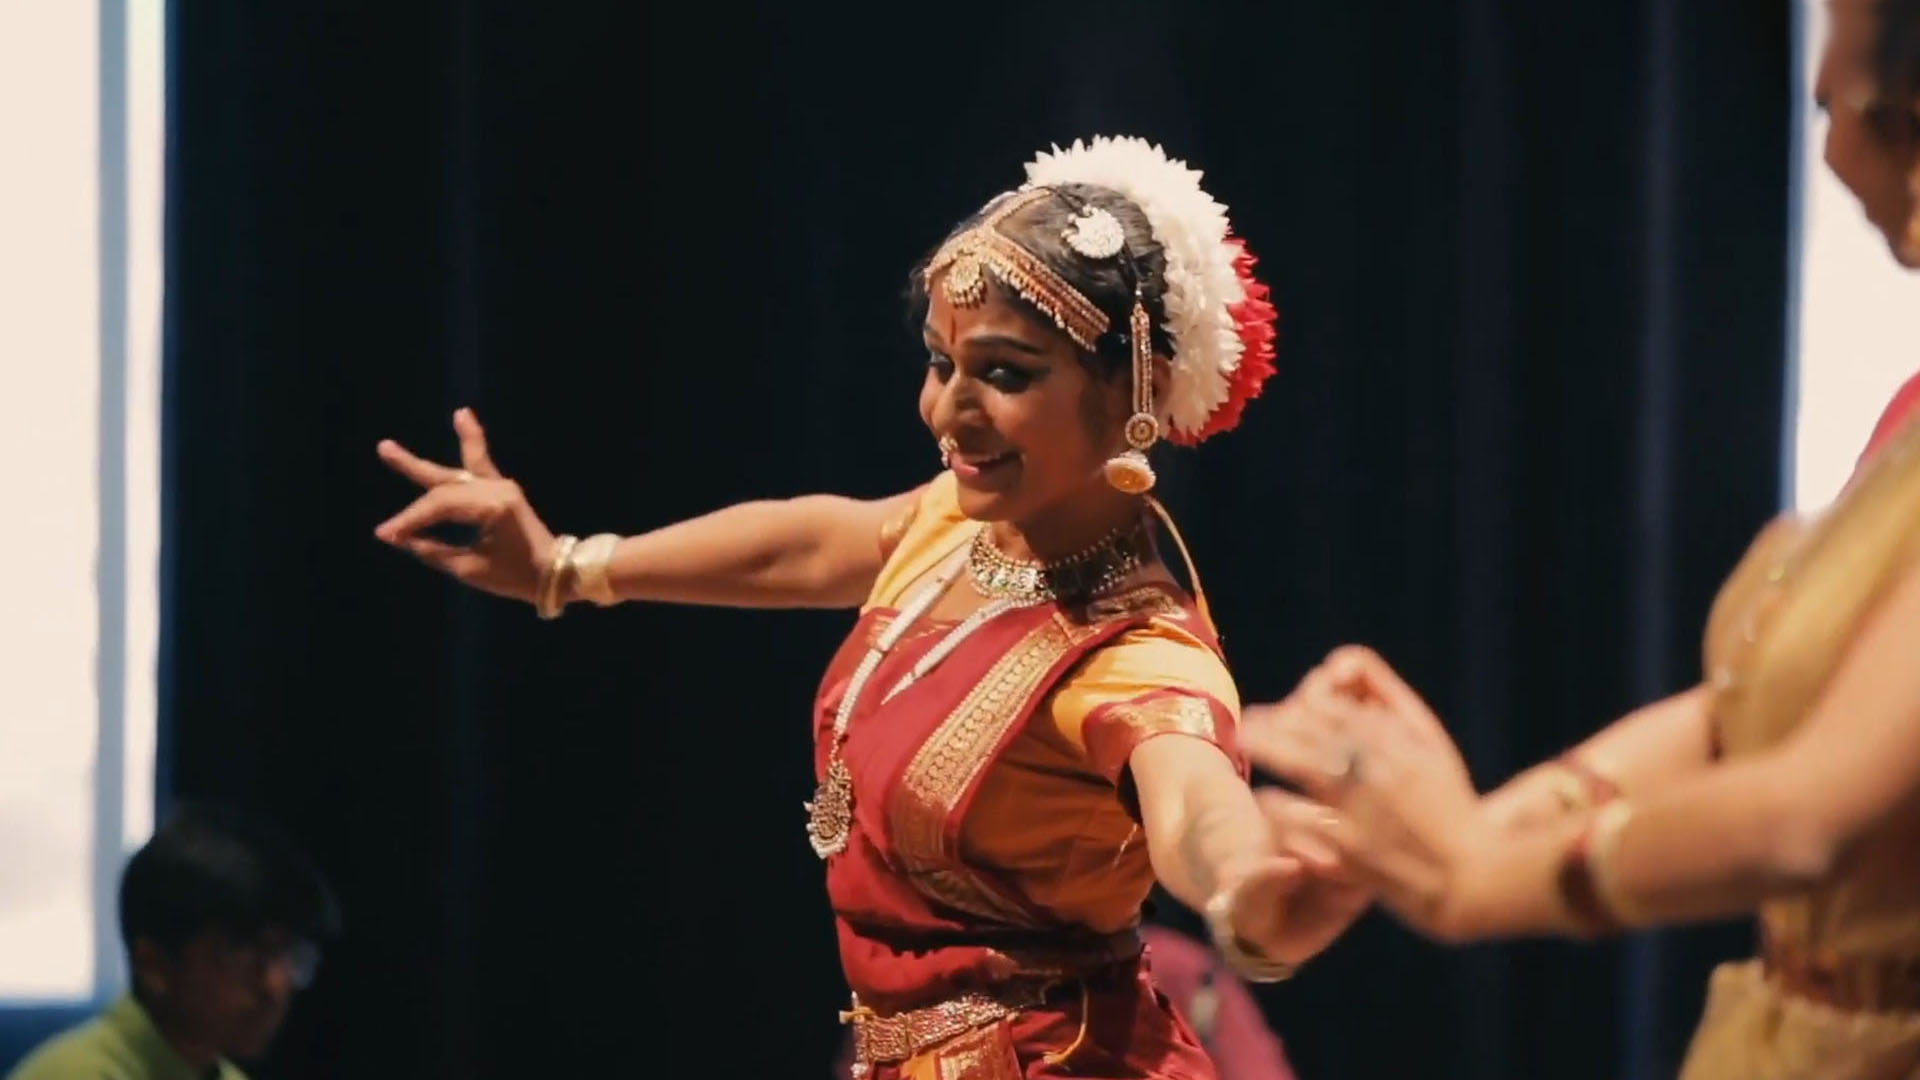 500+ Indian Classical Dance Pictures | Download Free Images on Unsplash